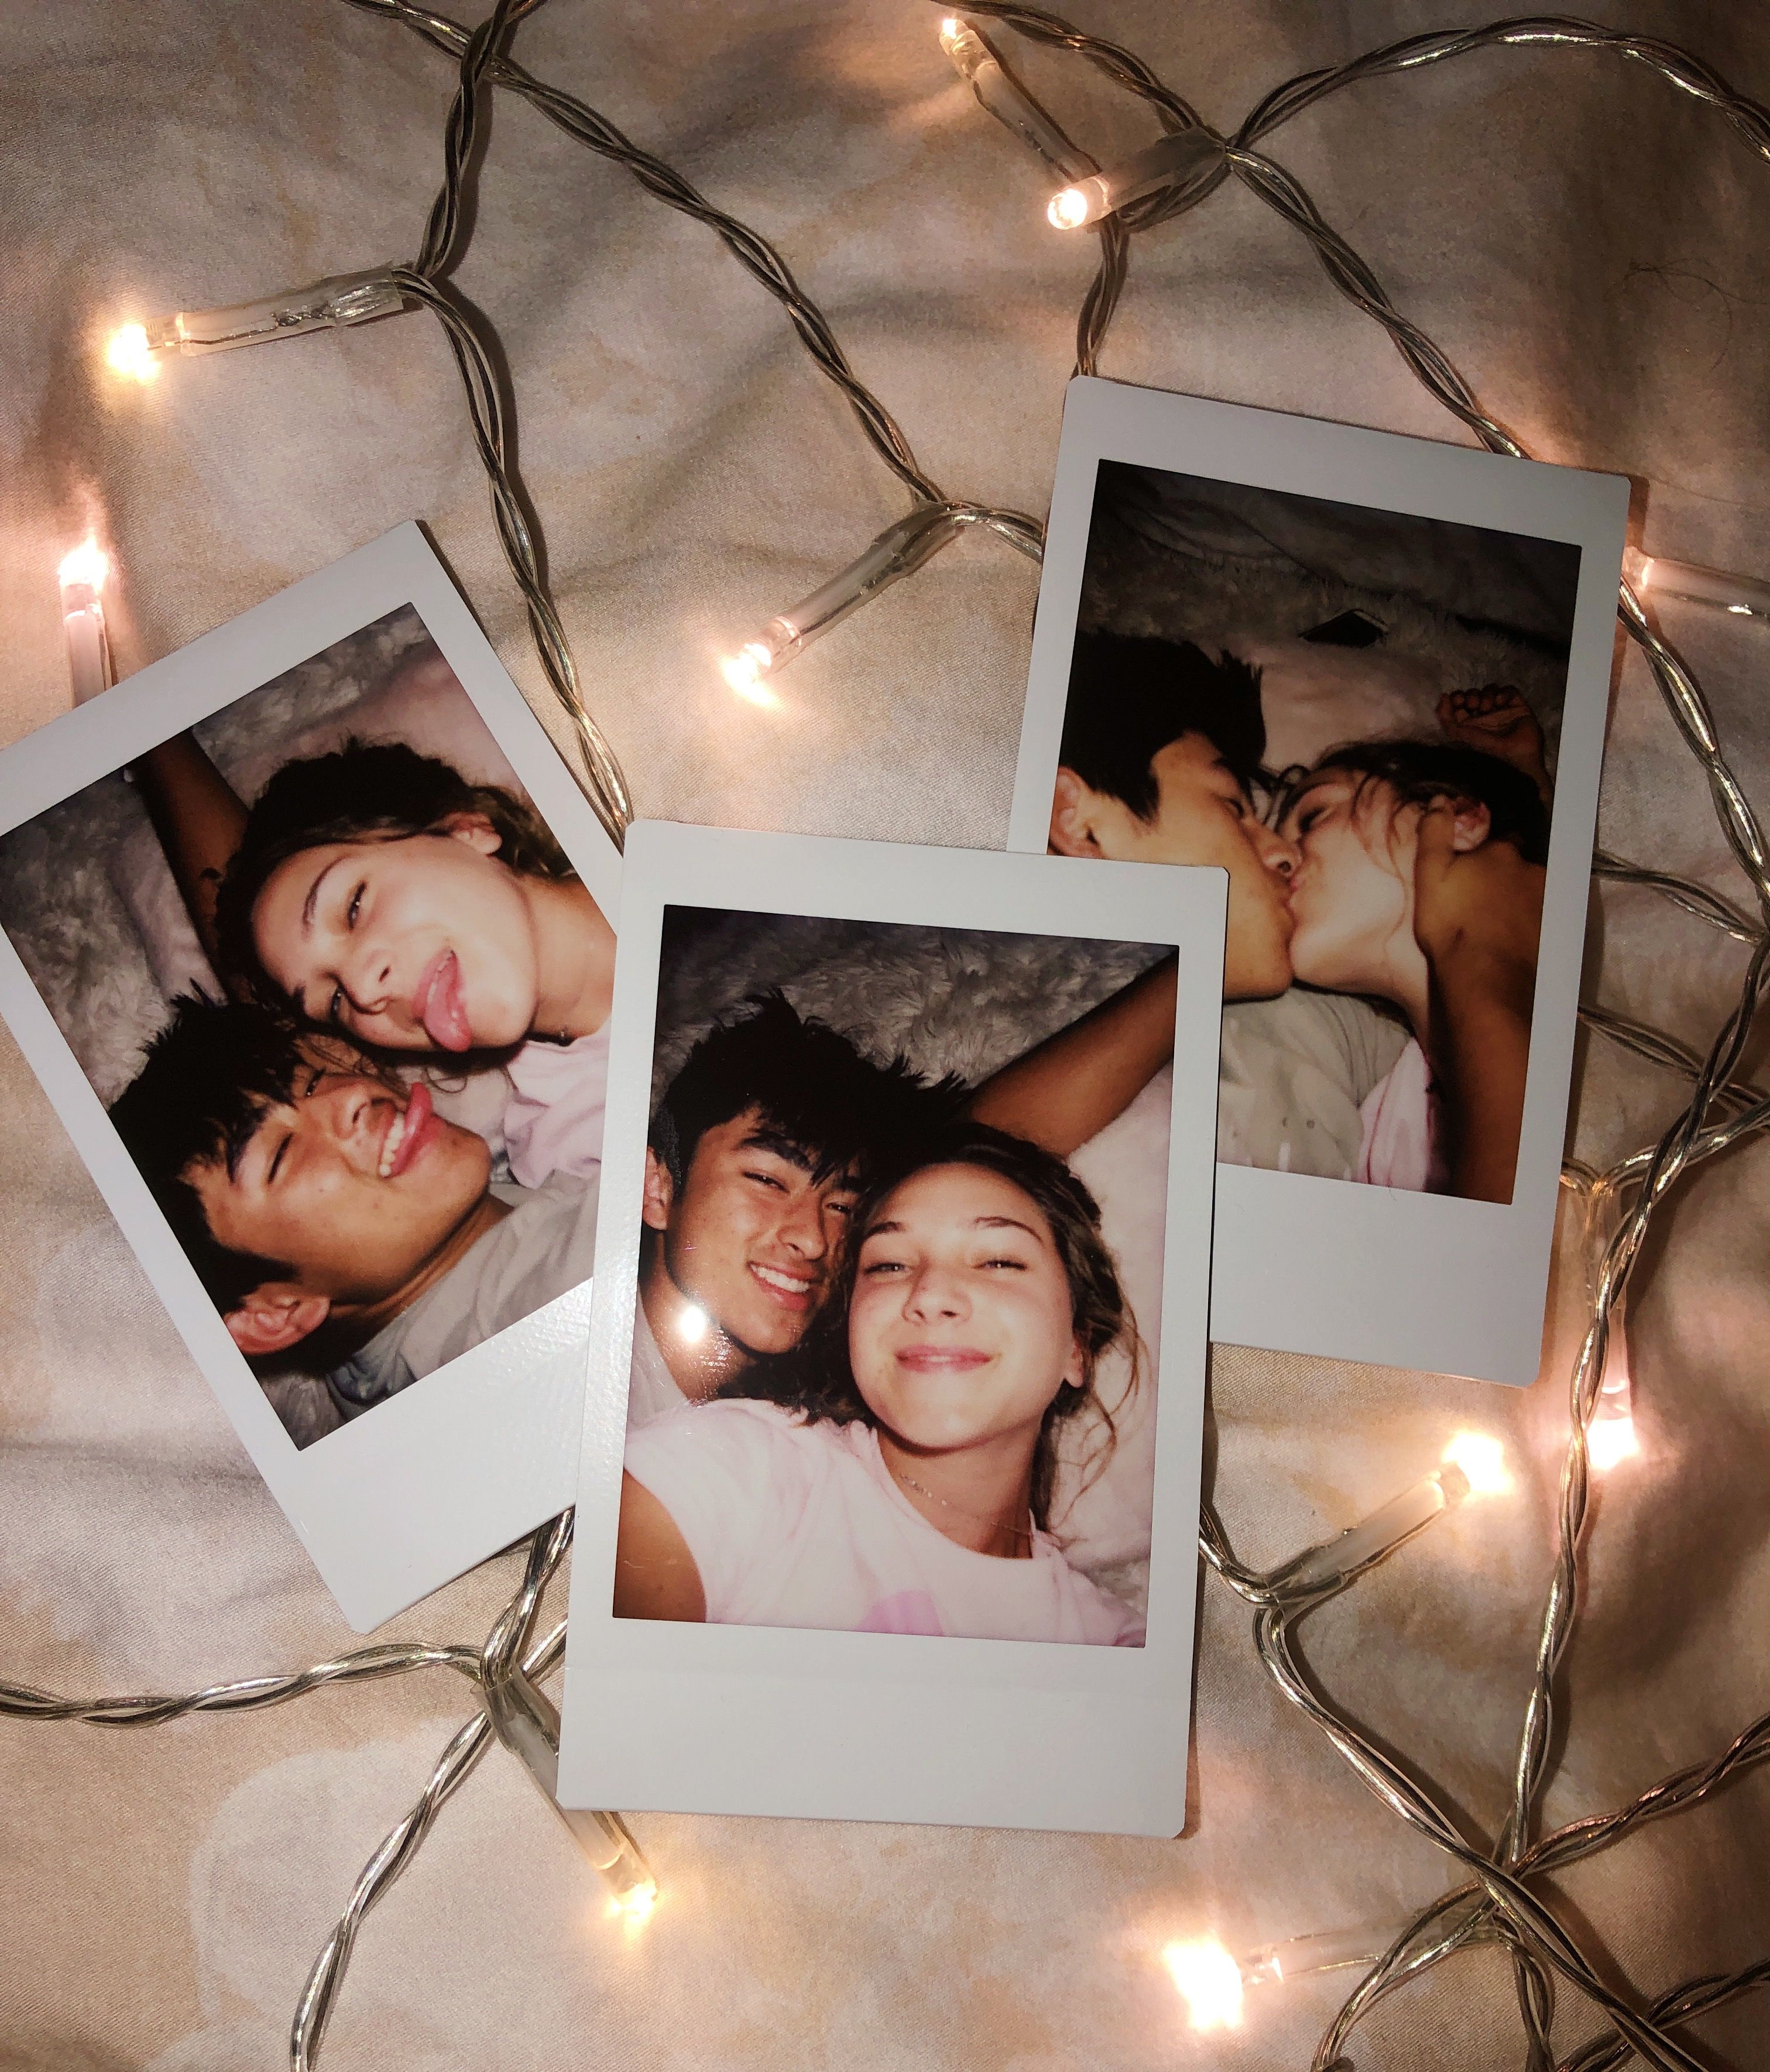 chantal lebeau recommends cute couple polaroid pictures pic